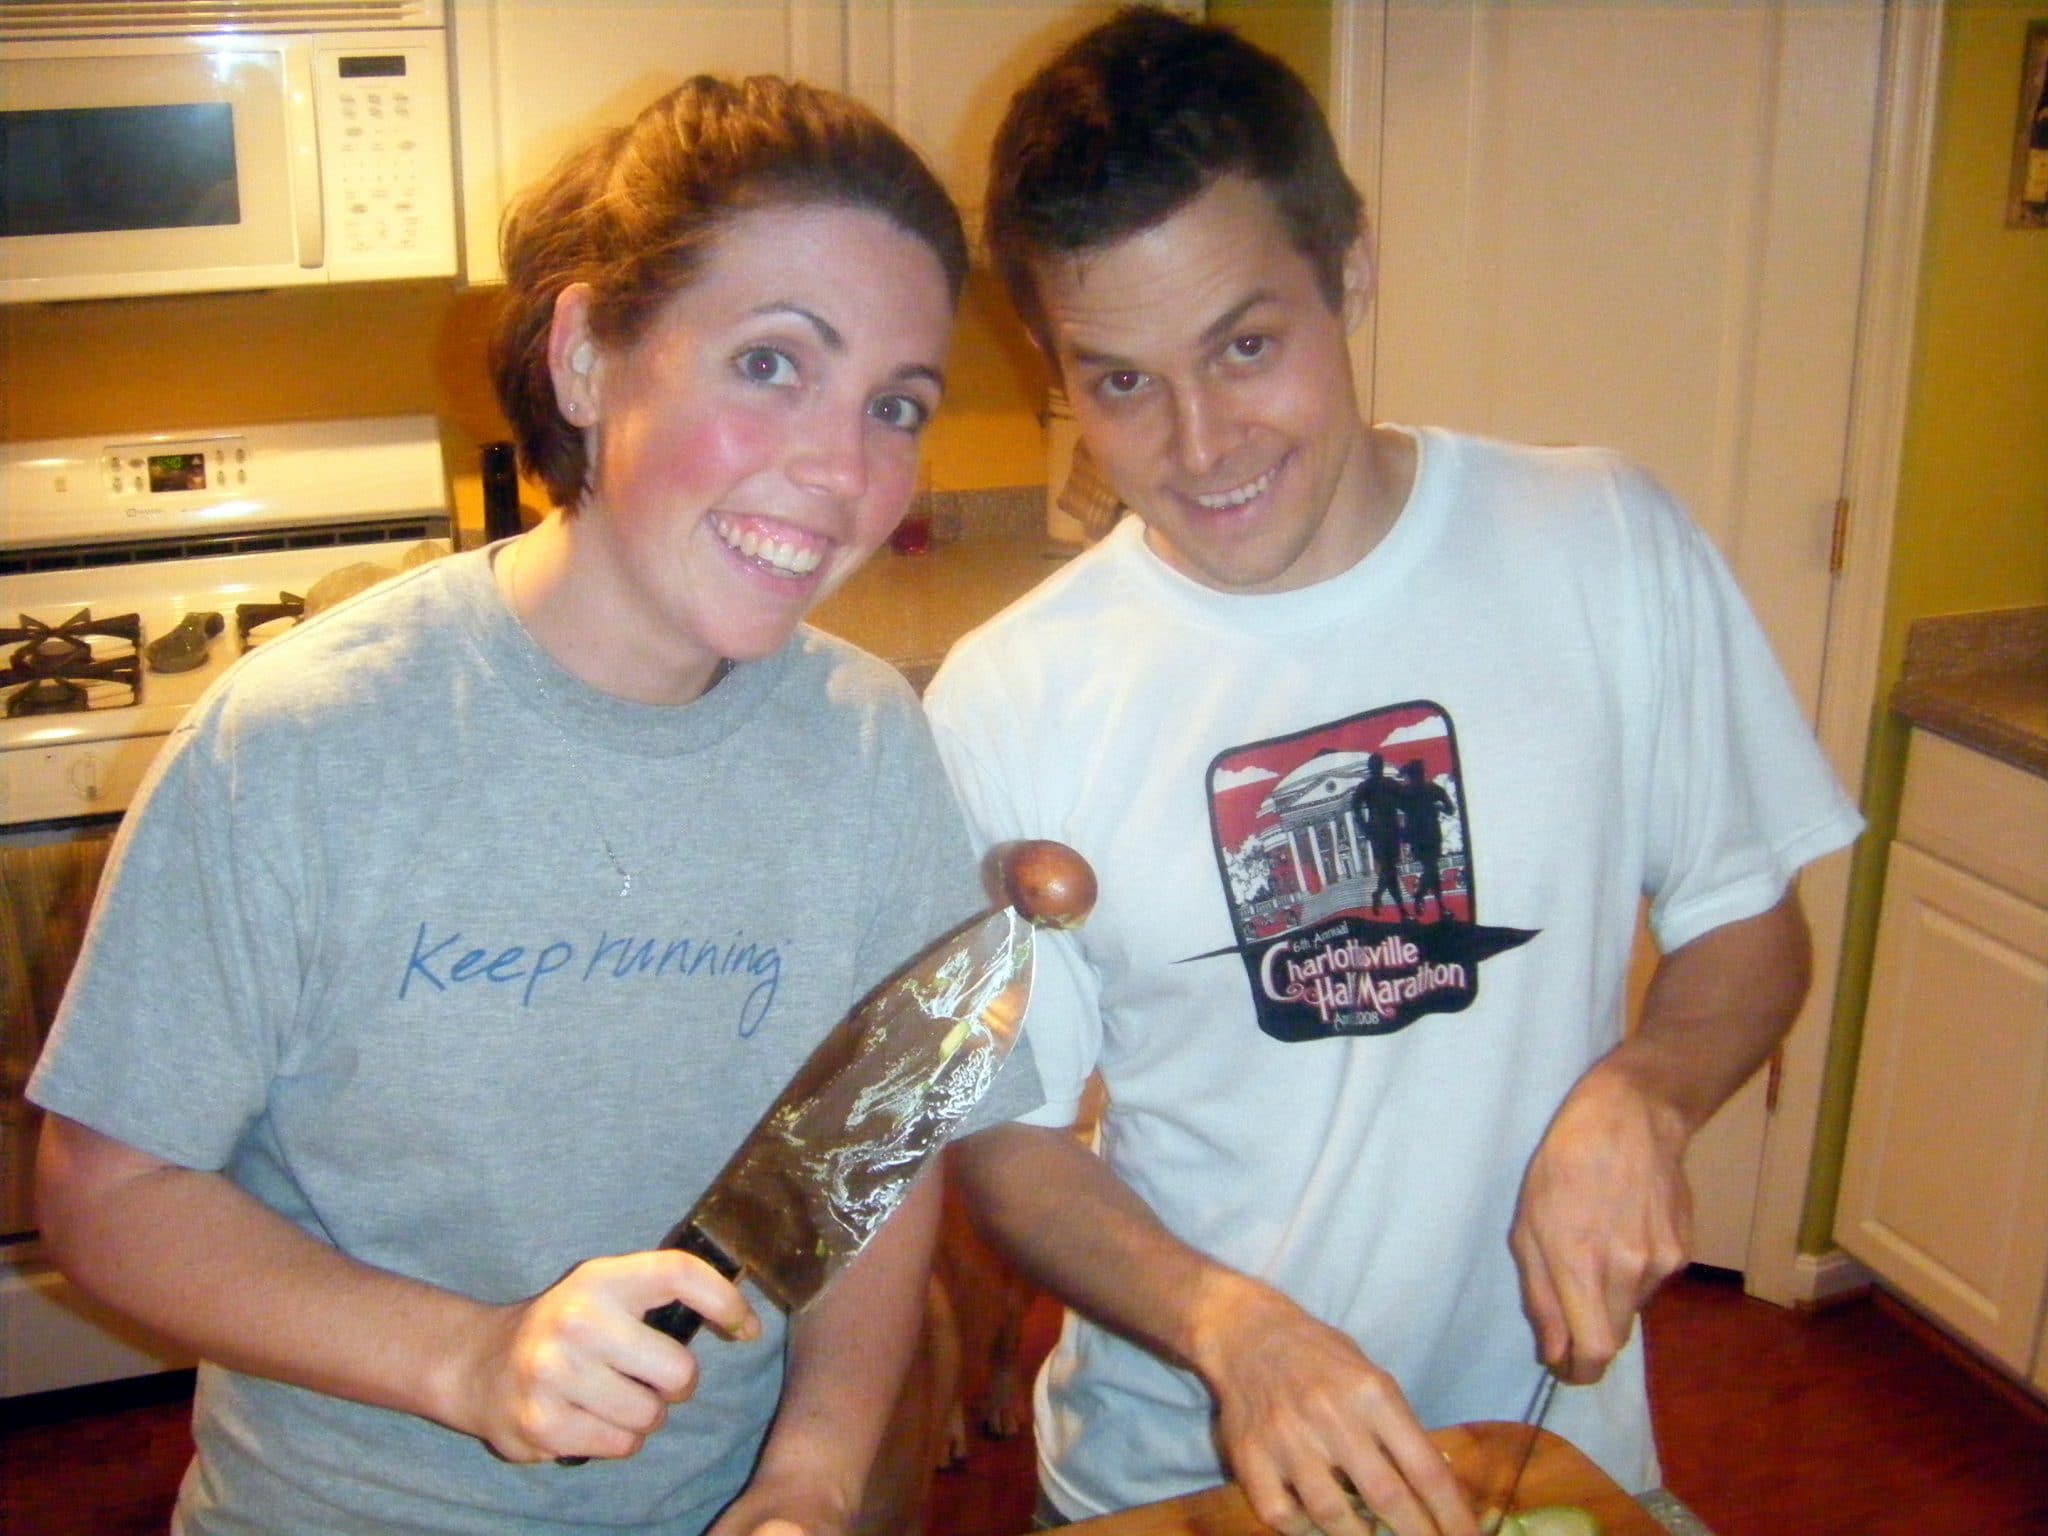 Matt and wife chopping and prepping meal